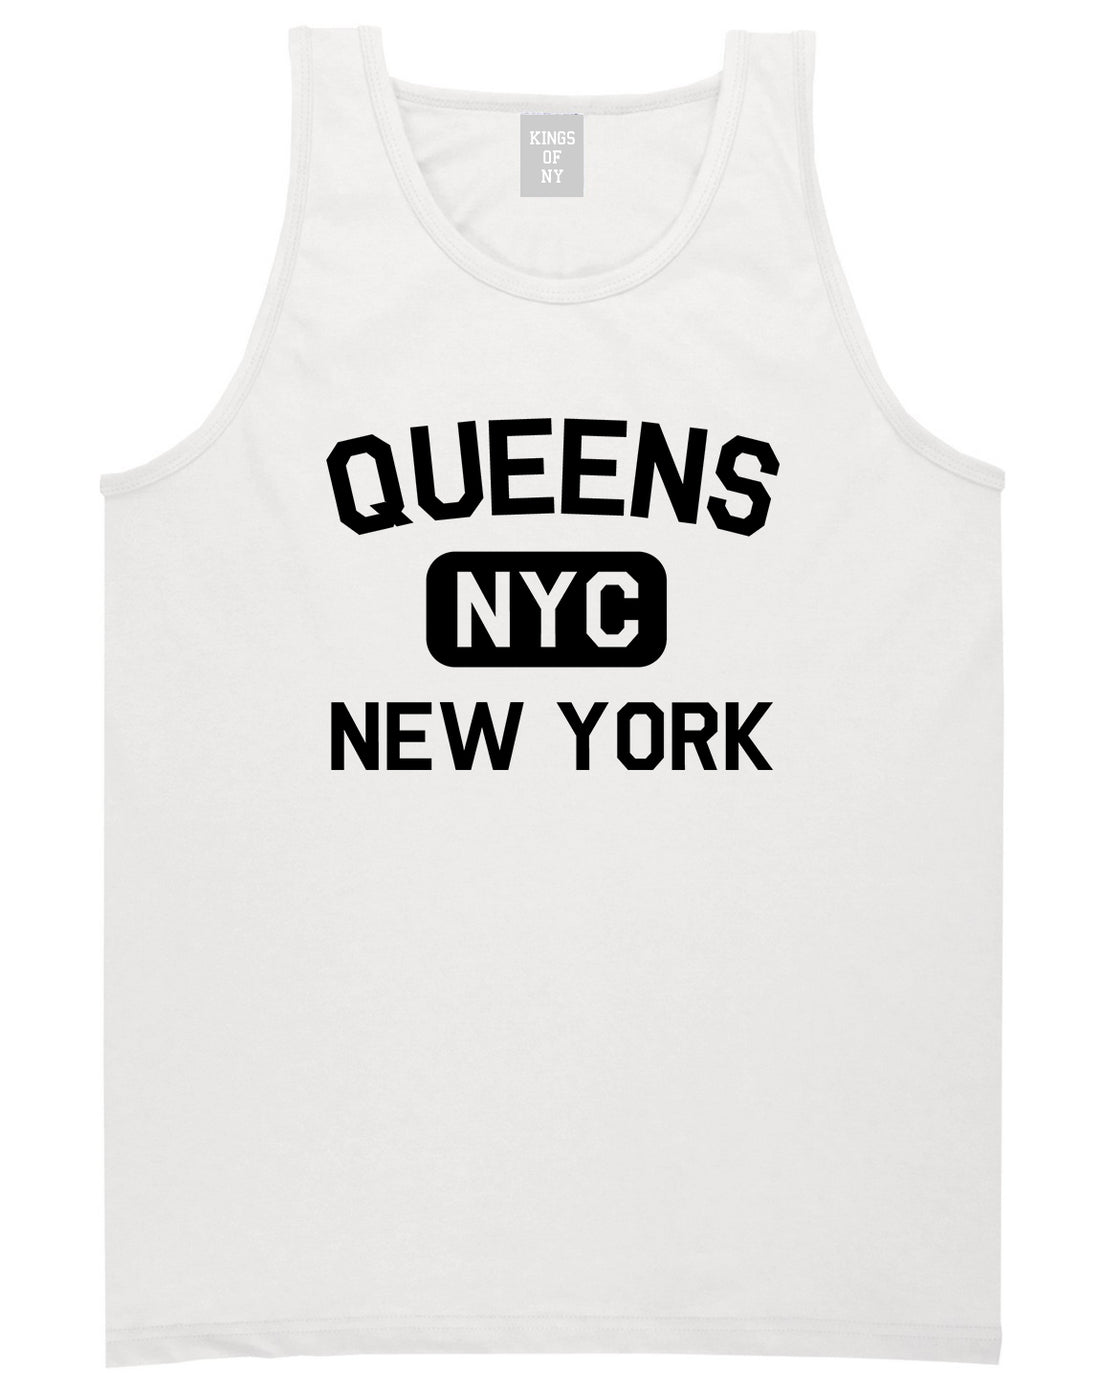 Queens Gym NYC New York Mens Tank Top T-Shirt White